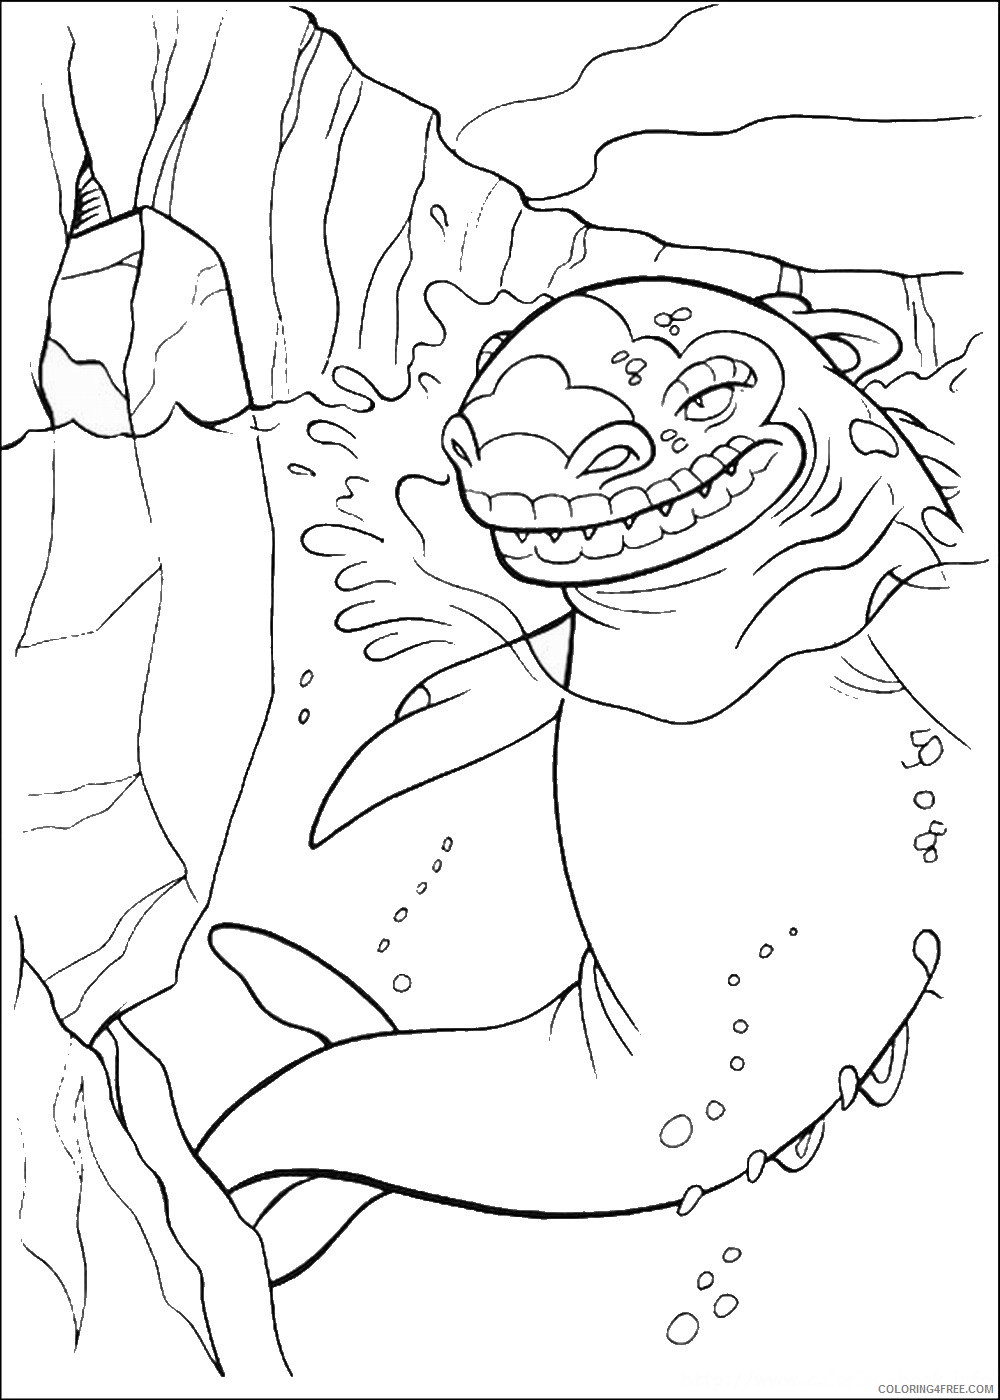 Ice Age Coloring Pages Cartoons ice age 02 Printable 2020 3373 Coloring4free